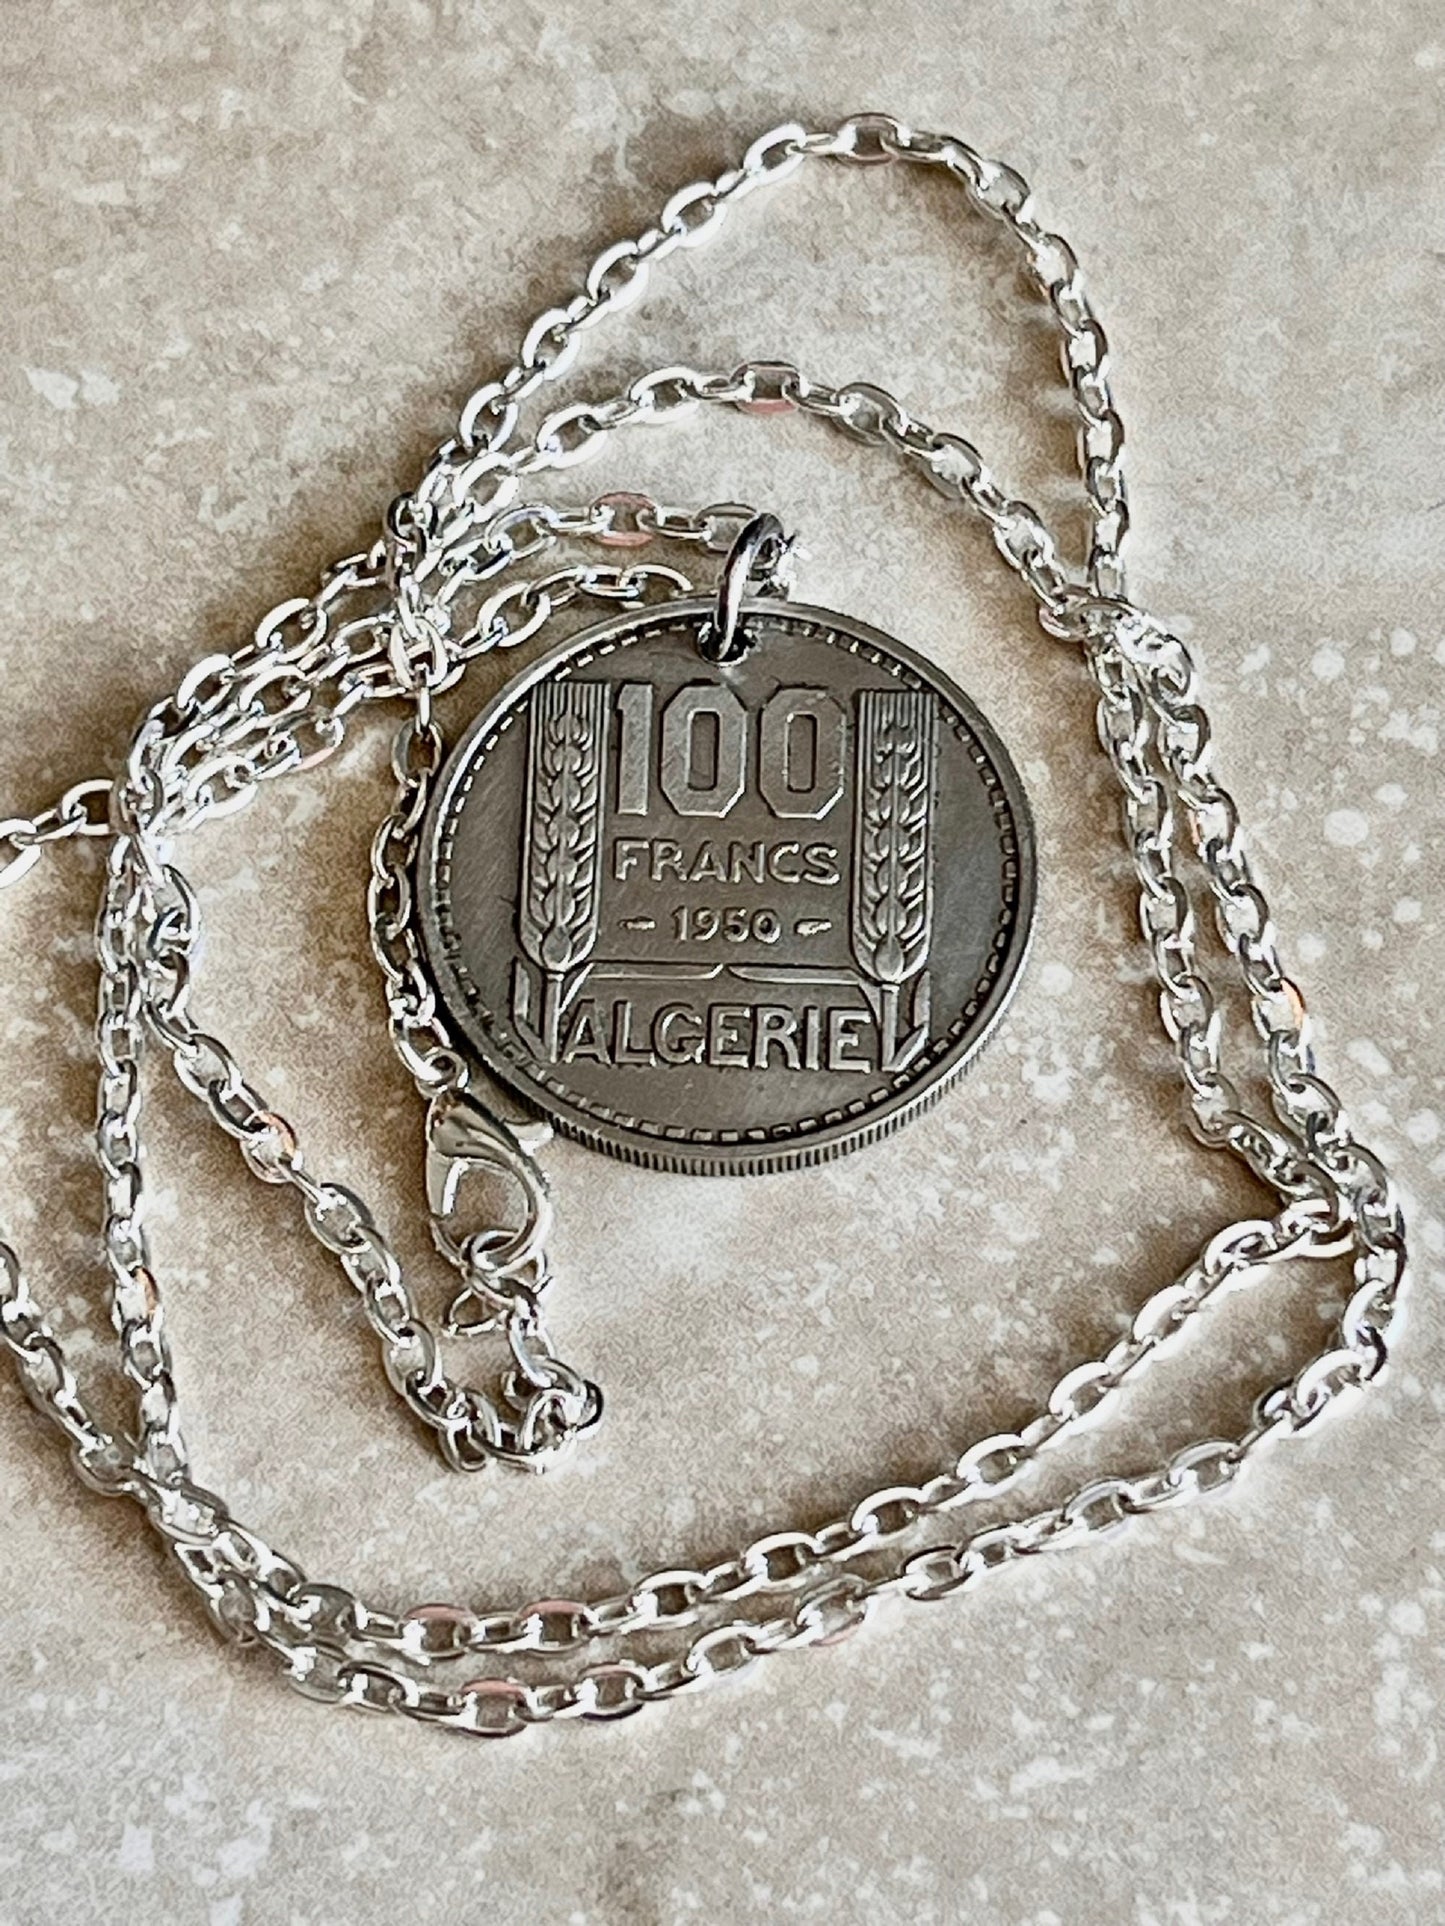 France Coin Necklace French 100 Franc Liberte Egalite Fraternite Personal Pendant Jewelry Gift Friend Charm For Him Her World Coin Collector